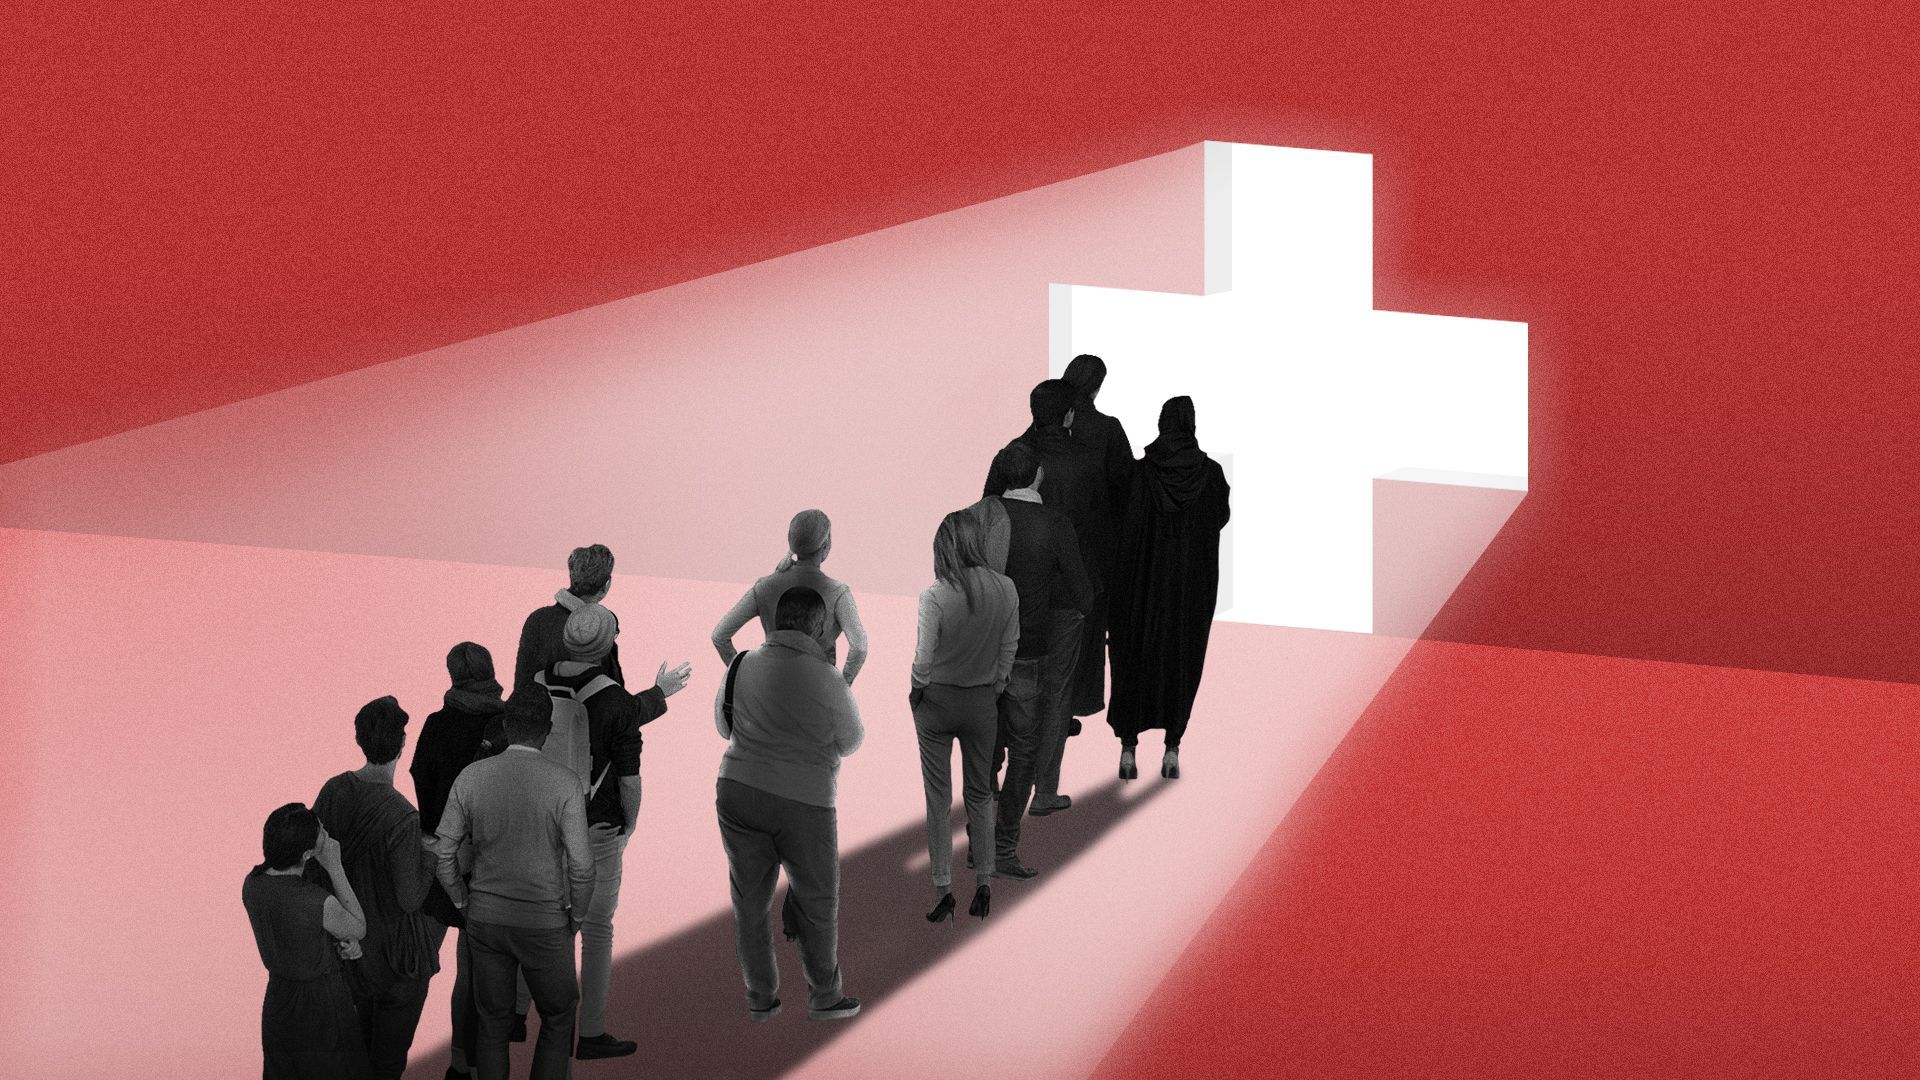 Illustration of a line of people waiting at a red cross-shaped door.